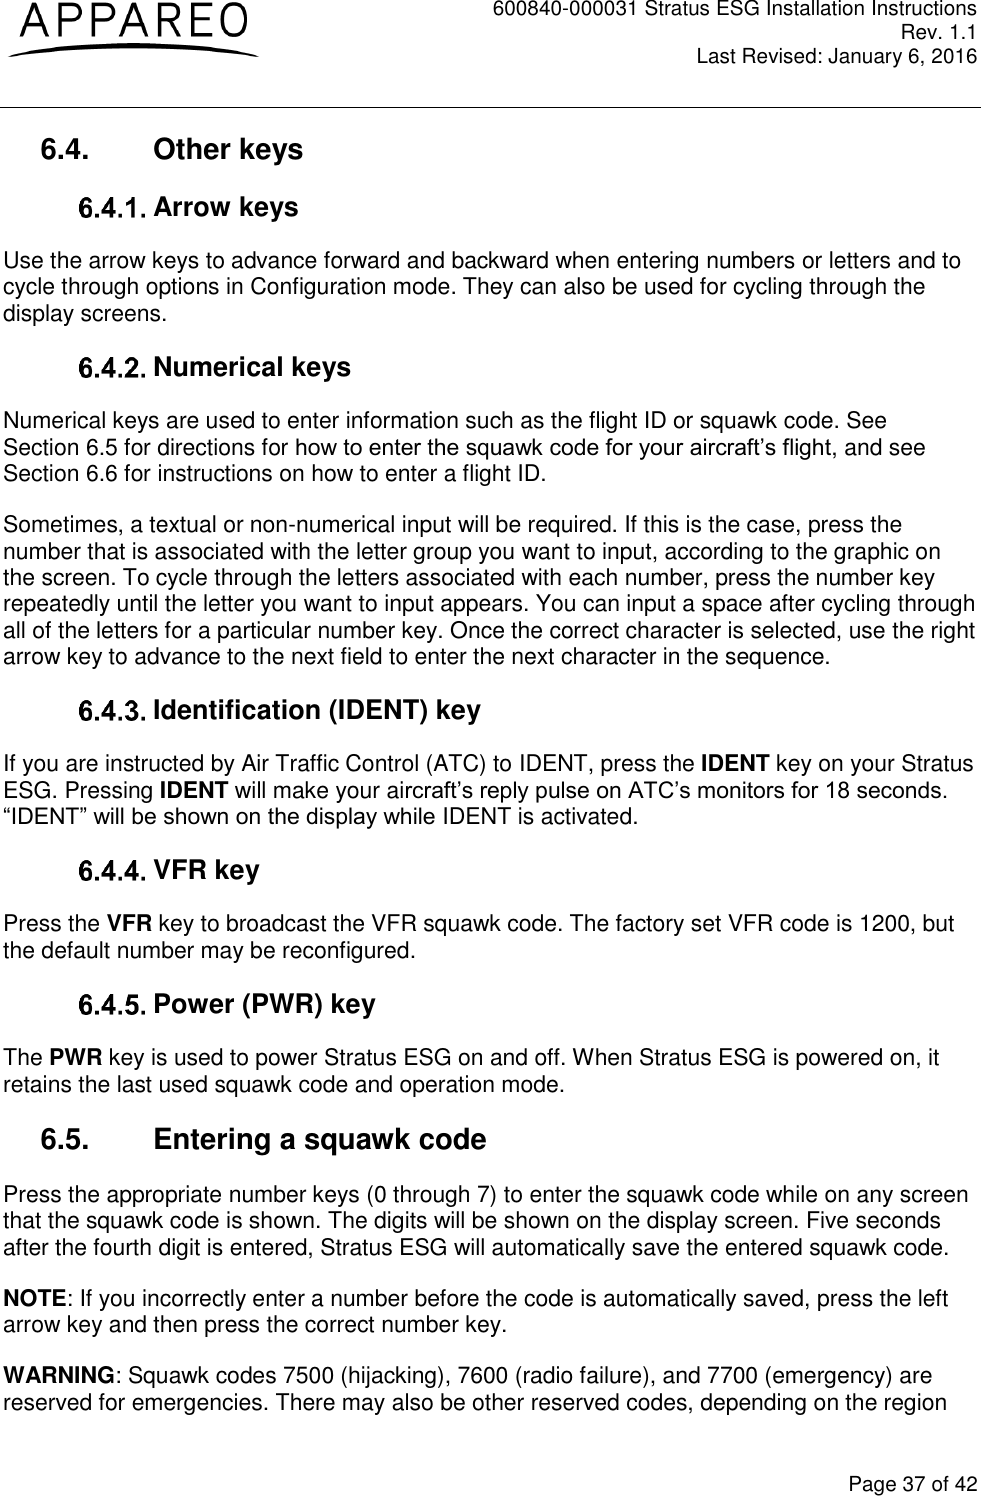 600840-000031 Stratus ESG Installation Instructions Rev. 1.1 Last Revised: January 6, 2016  Page 37 of 42 6.4.  Other keys  Arrow keys Use the arrow keys to advance forward and backward when entering numbers or letters and to cycle through options in Configuration mode. They can also be used for cycling through the display screens.  Numerical keys Numerical keys are used to enter information such as the flight ID or squawk code. See Section 6.5 for directions for how to enter the squawk code for your aircraft’s flight, and see Section 6.6 for instructions on how to enter a flight ID. Sometimes, a textual or non-numerical input will be required. If this is the case, press the number that is associated with the letter group you want to input, according to the graphic on the screen. To cycle through the letters associated with each number, press the number key repeatedly until the letter you want to input appears. You can input a space after cycling through all of the letters for a particular number key. Once the correct character is selected, use the right arrow key to advance to the next field to enter the next character in the sequence.  Identification (IDENT) key If you are instructed by Air Traffic Control (ATC) to IDENT, press the IDENT key on your Stratus ESG. Pressing IDENT will make your aircraft’s reply pulse on ATC’s monitors for 18 seconds. “IDENT” will be shown on the display while IDENT is activated.  VFR key Press the VFR key to broadcast the VFR squawk code. The factory set VFR code is 1200, but the default number may be reconfigured.  Power (PWR) key The PWR key is used to power Stratus ESG on and off. When Stratus ESG is powered on, it retains the last used squawk code and operation mode. 6.5.  Entering a squawk code Press the appropriate number keys (0 through 7) to enter the squawk code while on any screen that the squawk code is shown. The digits will be shown on the display screen. Five seconds after the fourth digit is entered, Stratus ESG will automatically save the entered squawk code. NOTE: If you incorrectly enter a number before the code is automatically saved, press the left arrow key and then press the correct number key. WARNING: Squawk codes 7500 (hijacking), 7600 (radio failure), and 7700 (emergency) are reserved for emergencies. There may also be other reserved codes, depending on the region 